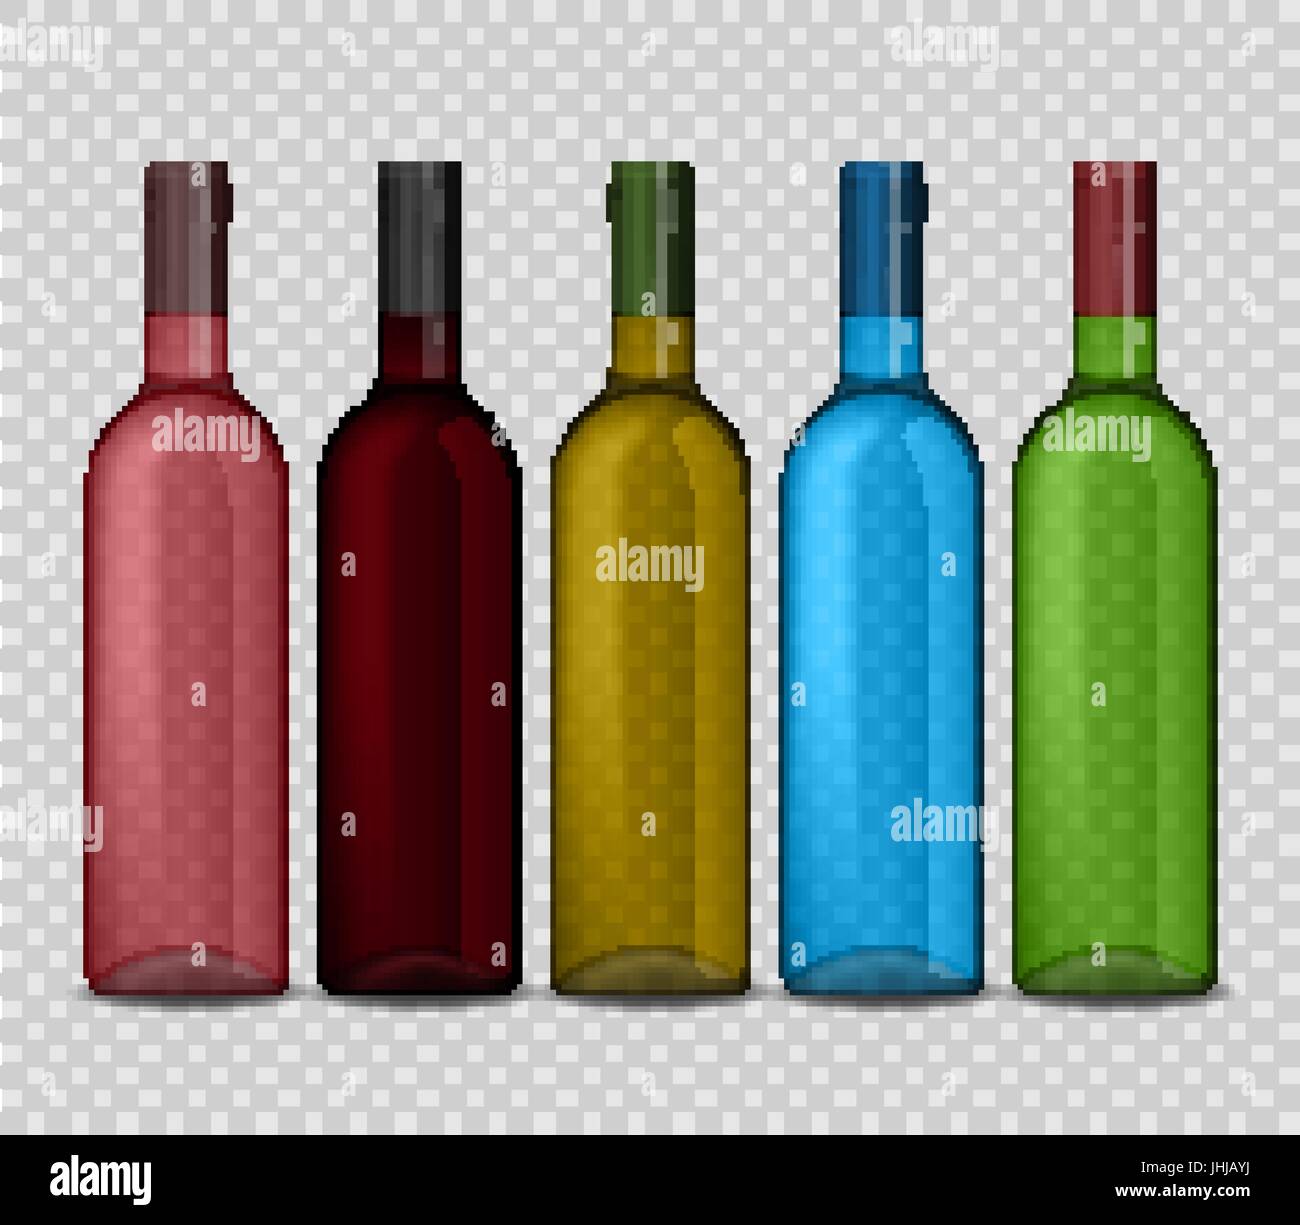 Set of transparent vector bottle of wine on checkered background. Stock Vector